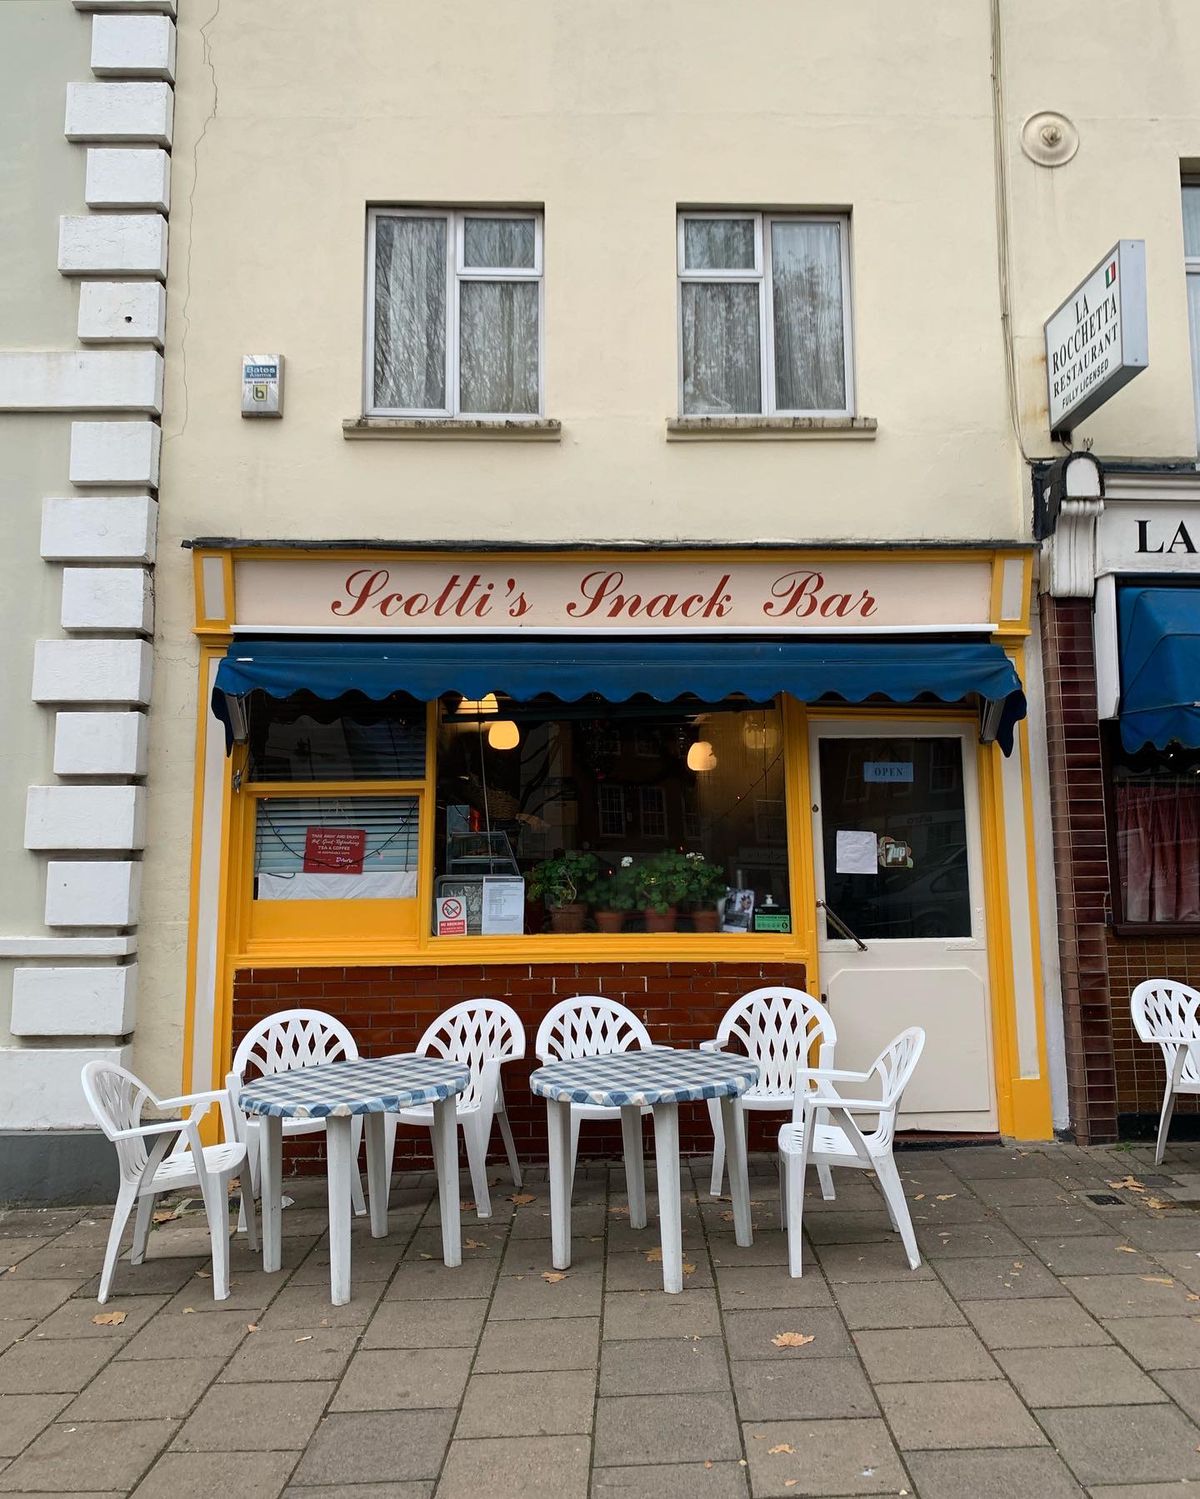 Scotti’s Snack Bar — the blue cream and yellow caff in Clerkwenwell Green has white plastic tables and chairs outside on concrete flagstones.